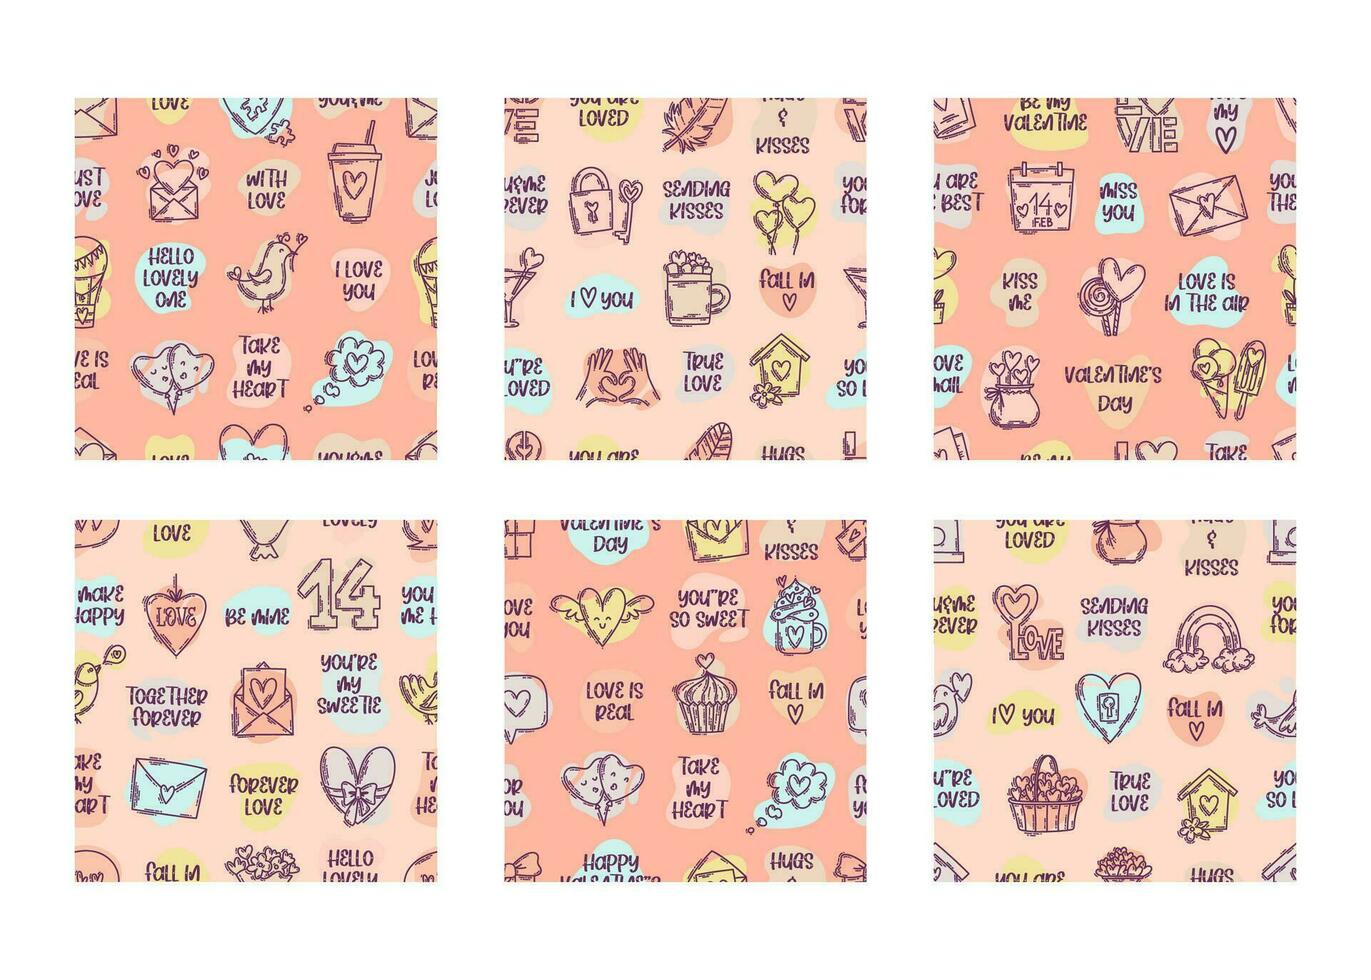 The love theme doodle style color seamless pattern, Valentines Day hand-drawn icons with a simple engraving retro effect. Romantic mood, cute symbols and elements backgrounds collection. vector